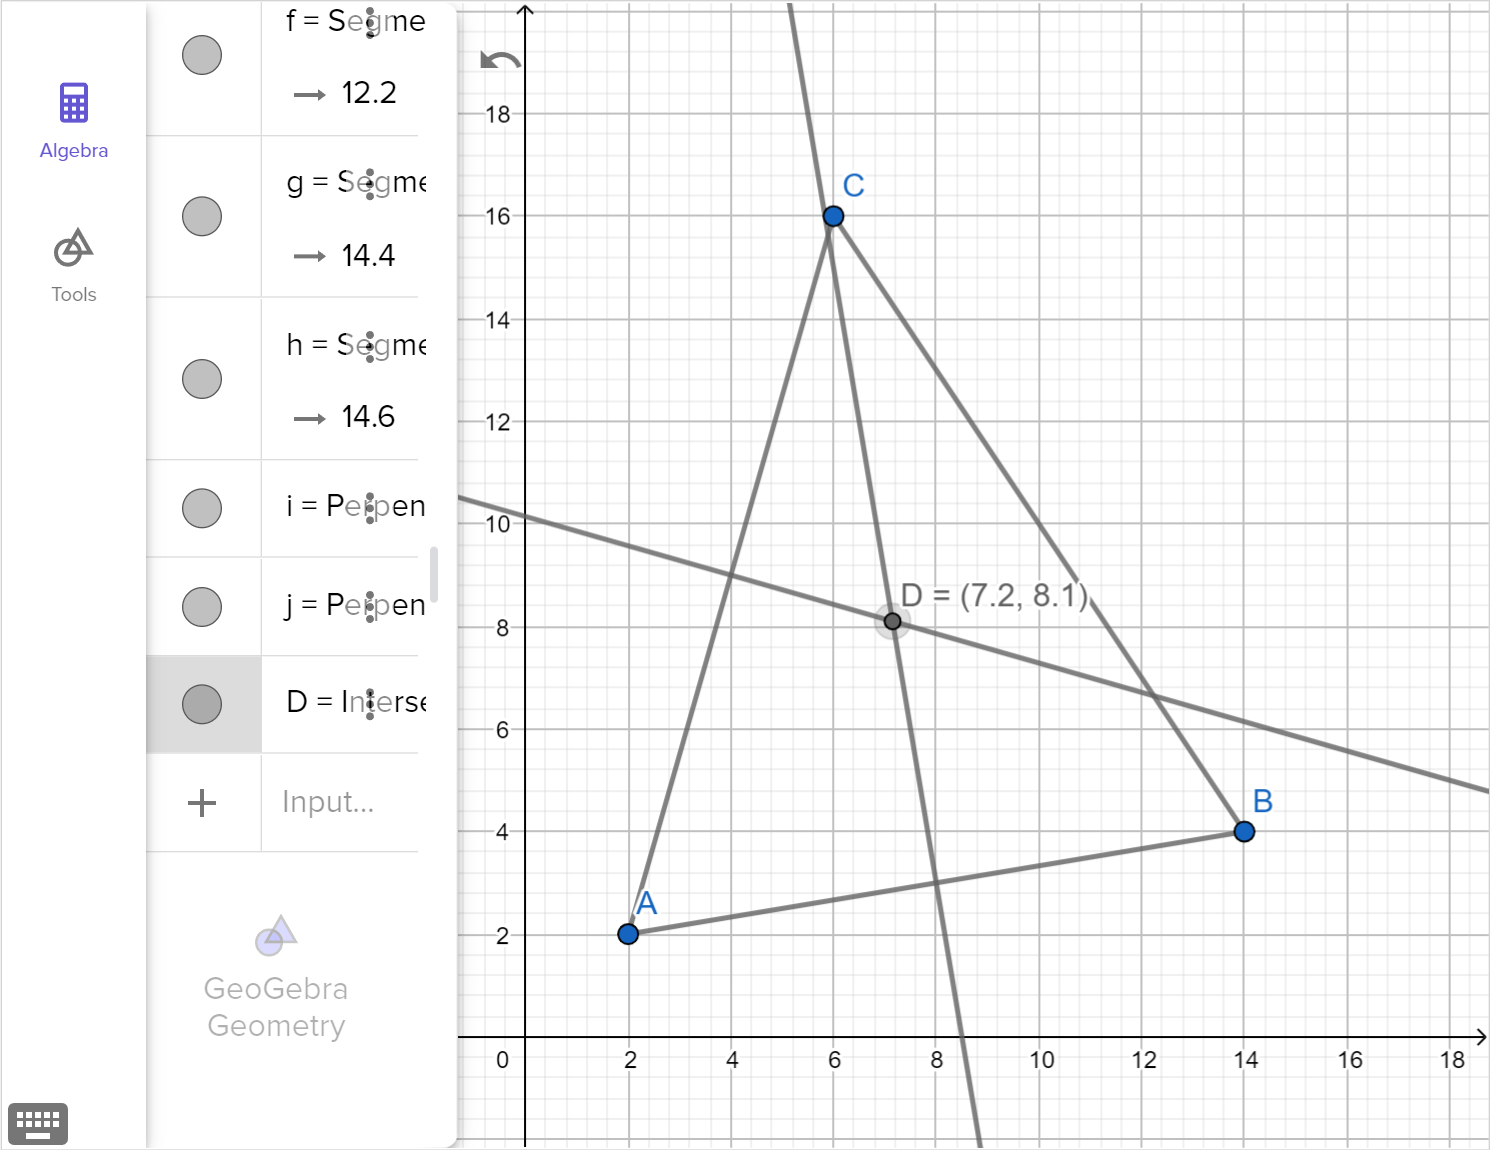 A screenshot of the GeoGebra geometry tool showing how to find point of intersection of the perpendicular bisectors of triangle A B C. Speak to your teacher for more details.